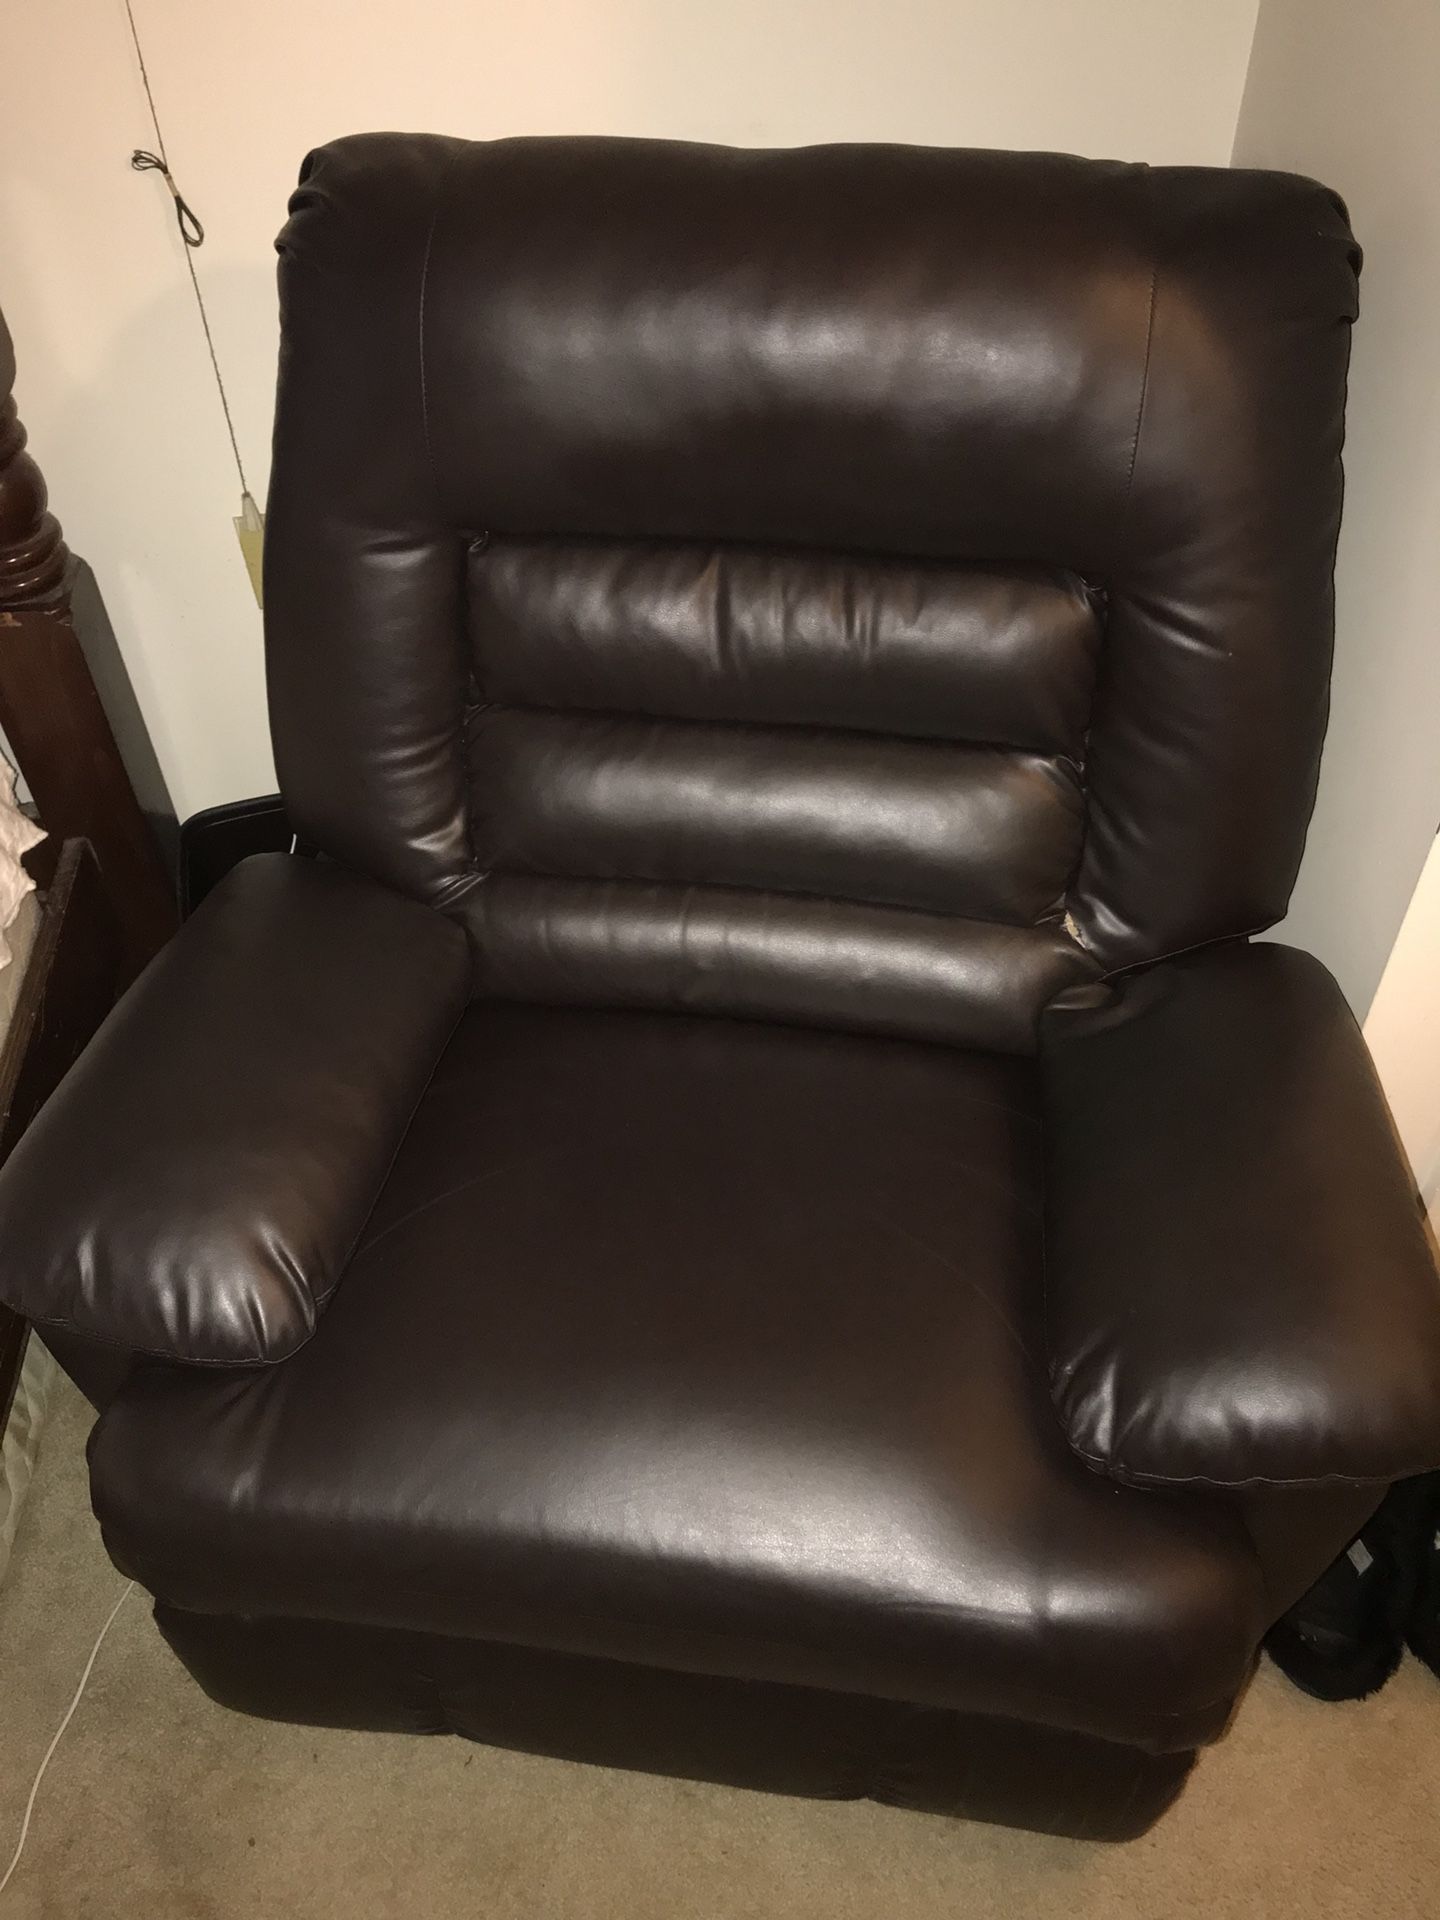 Great recliner in good condition must go immediately